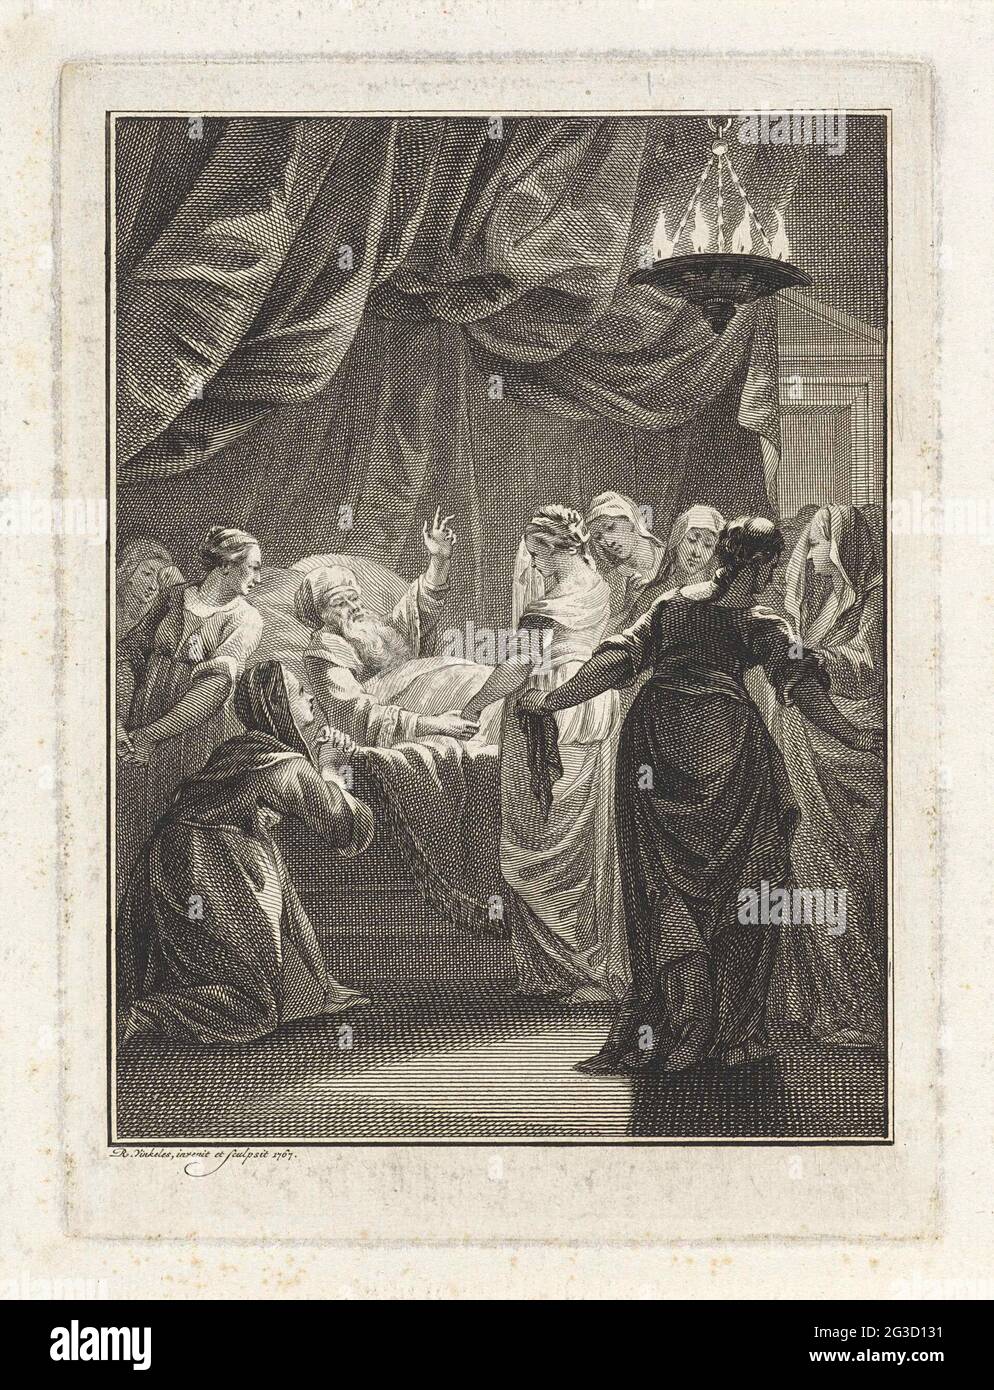 Solomon death bed. Solomon is located on his deathbed and is surrounded